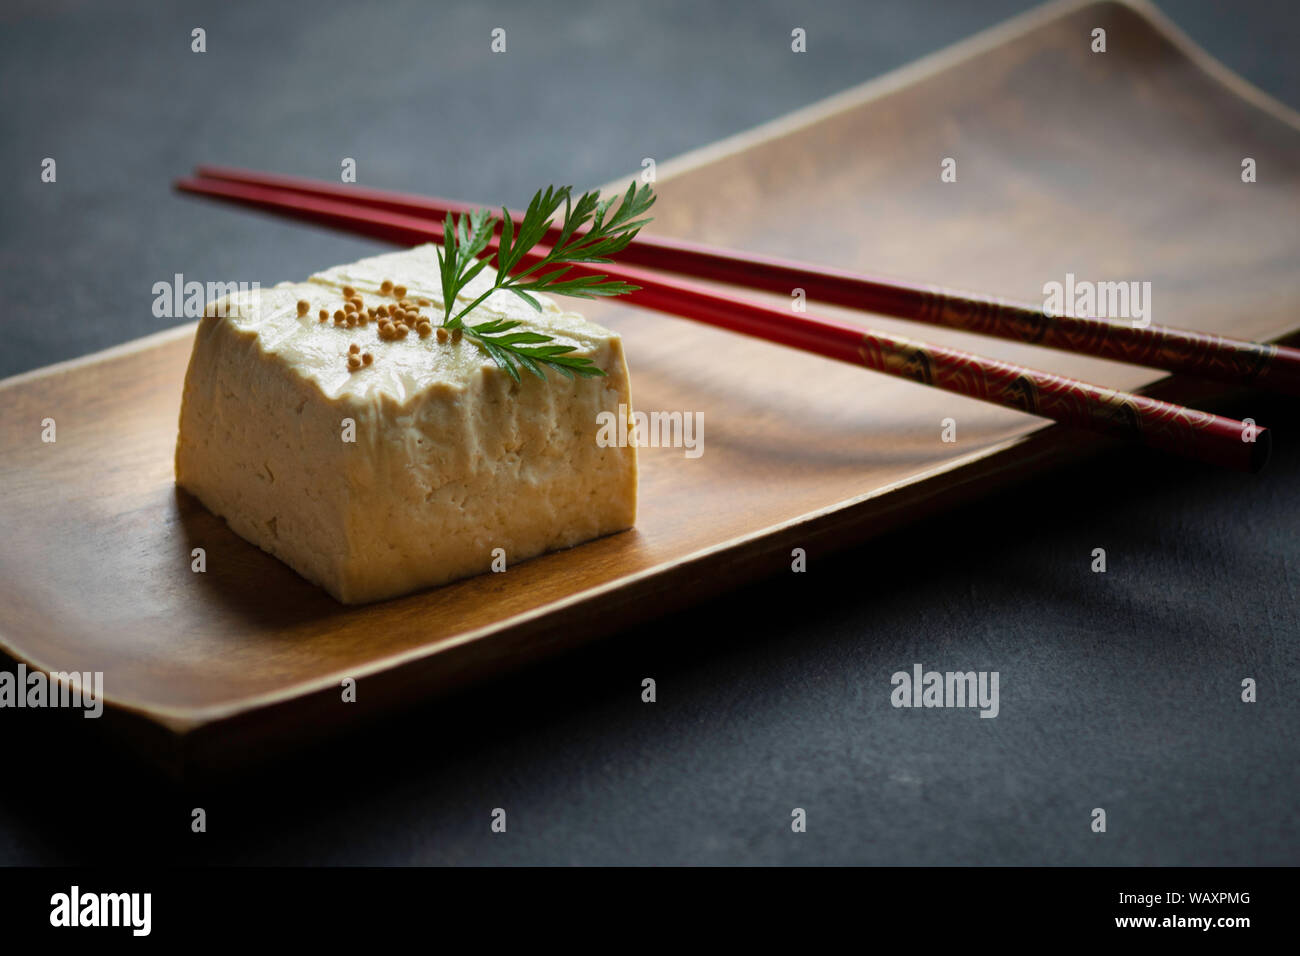 block of tofu in close-up view on wooden plate and chopsticks Stock Photo